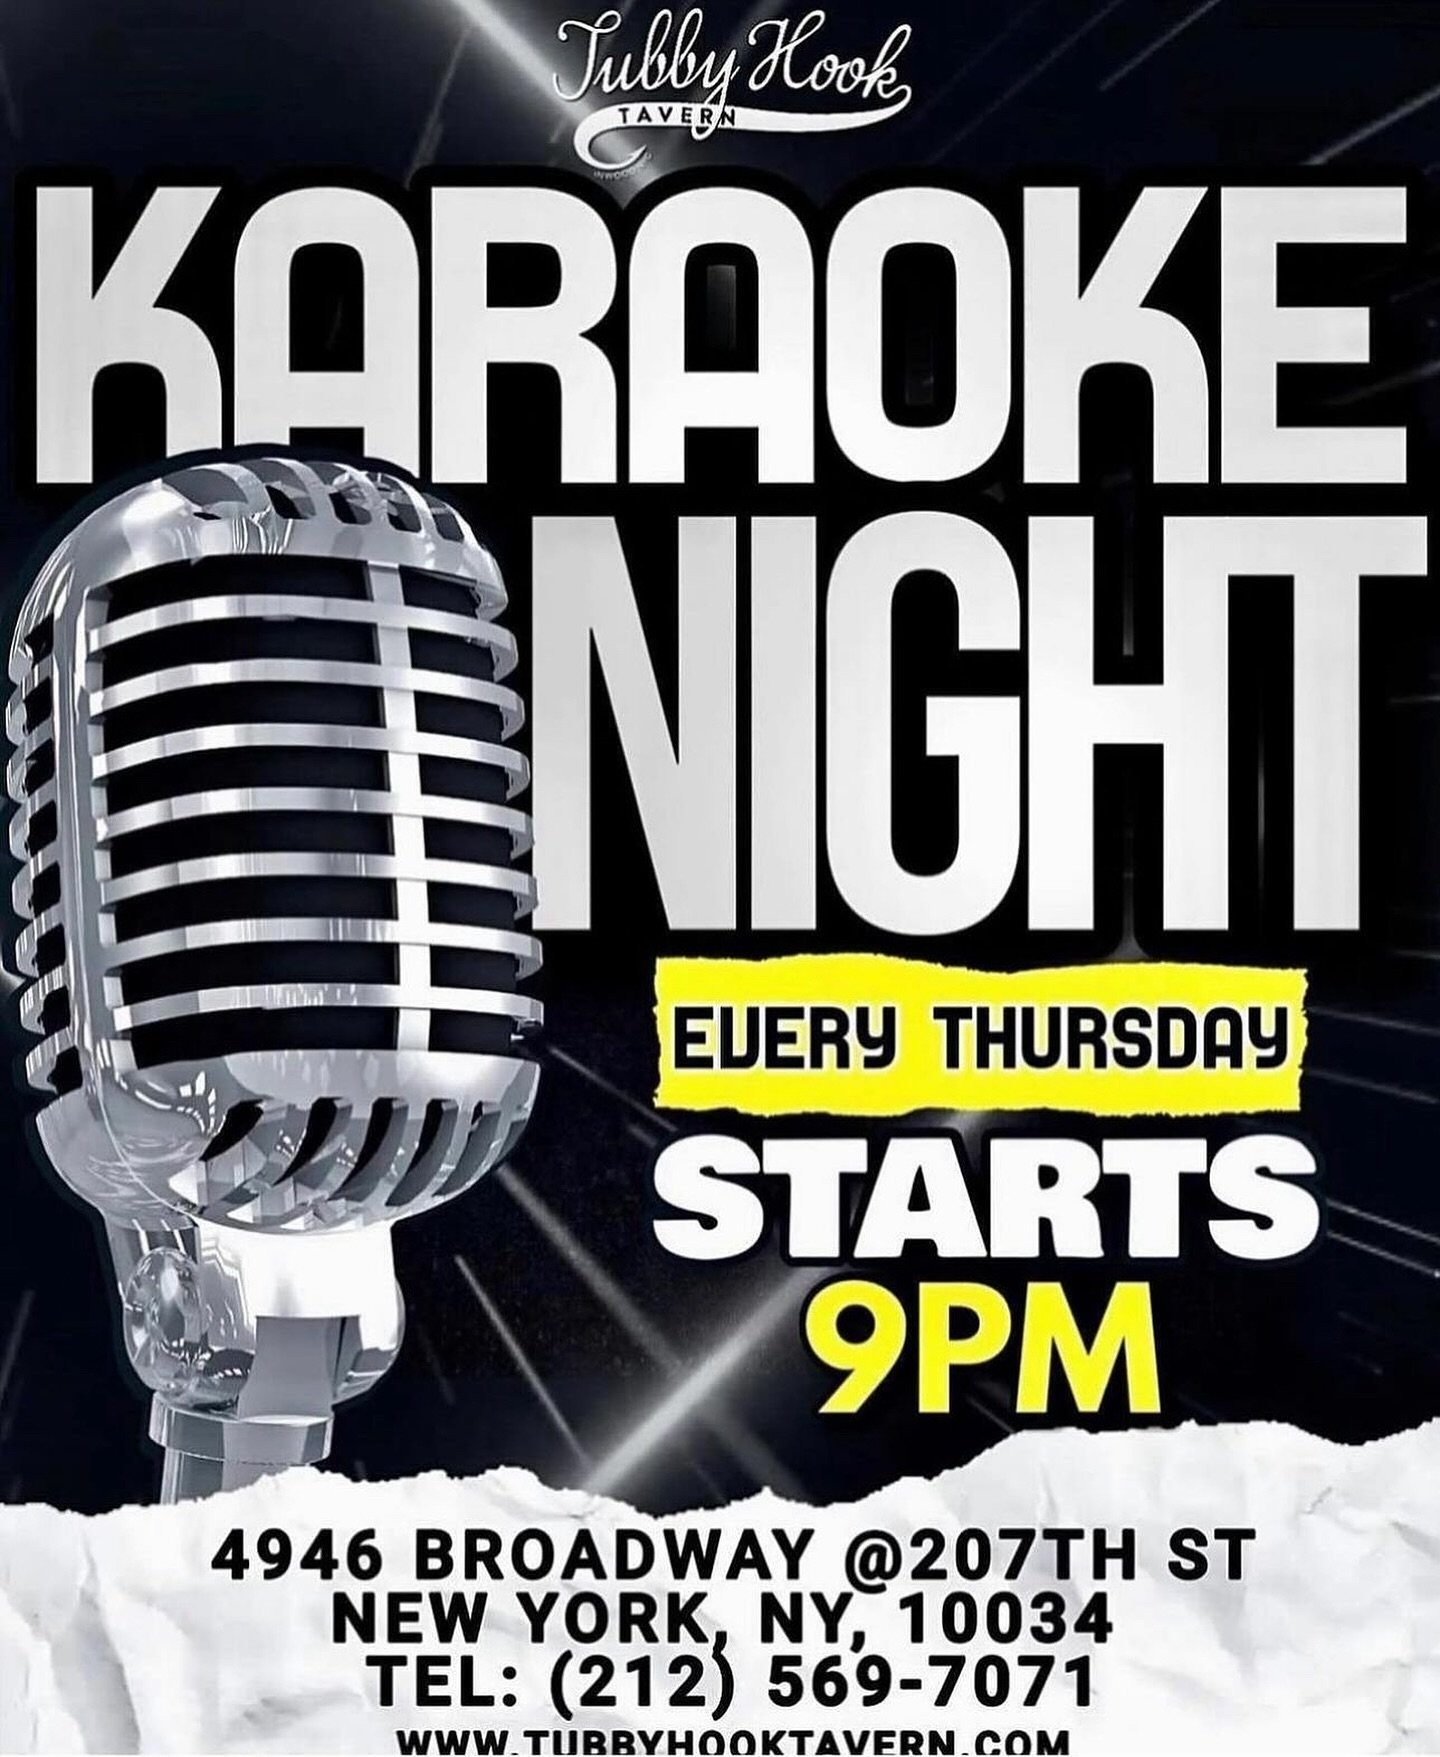 It&rsquo;s Thursday karaoke, starts 9pm. it&rsquo;s the night of singing and dancing 🎤🕺🏻💃

📍4946 Broadway @207th St, NY, 10034

#inwood #inwoodnyc #uptown #uptownnyc #karaoke #karaokenight #karaokeparty #sing #singers #broadway #letsdrink #letse